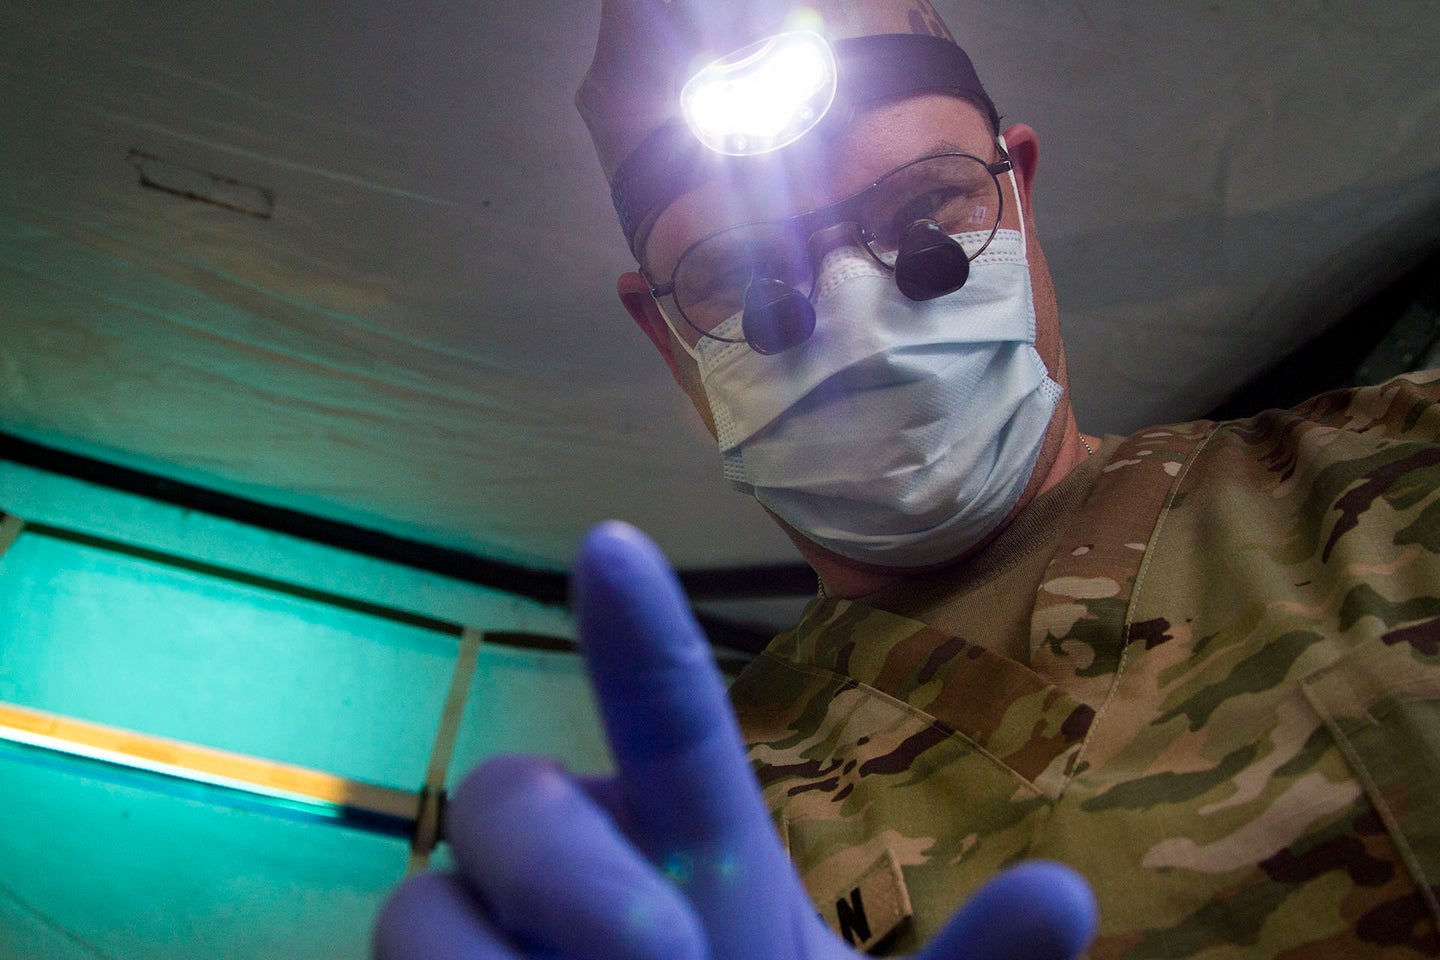 An Army dentist prepares to work on a patient as part of a medical readiness training exercise. (U.S. Army photo by. Sgt. Anshu Pandeya)